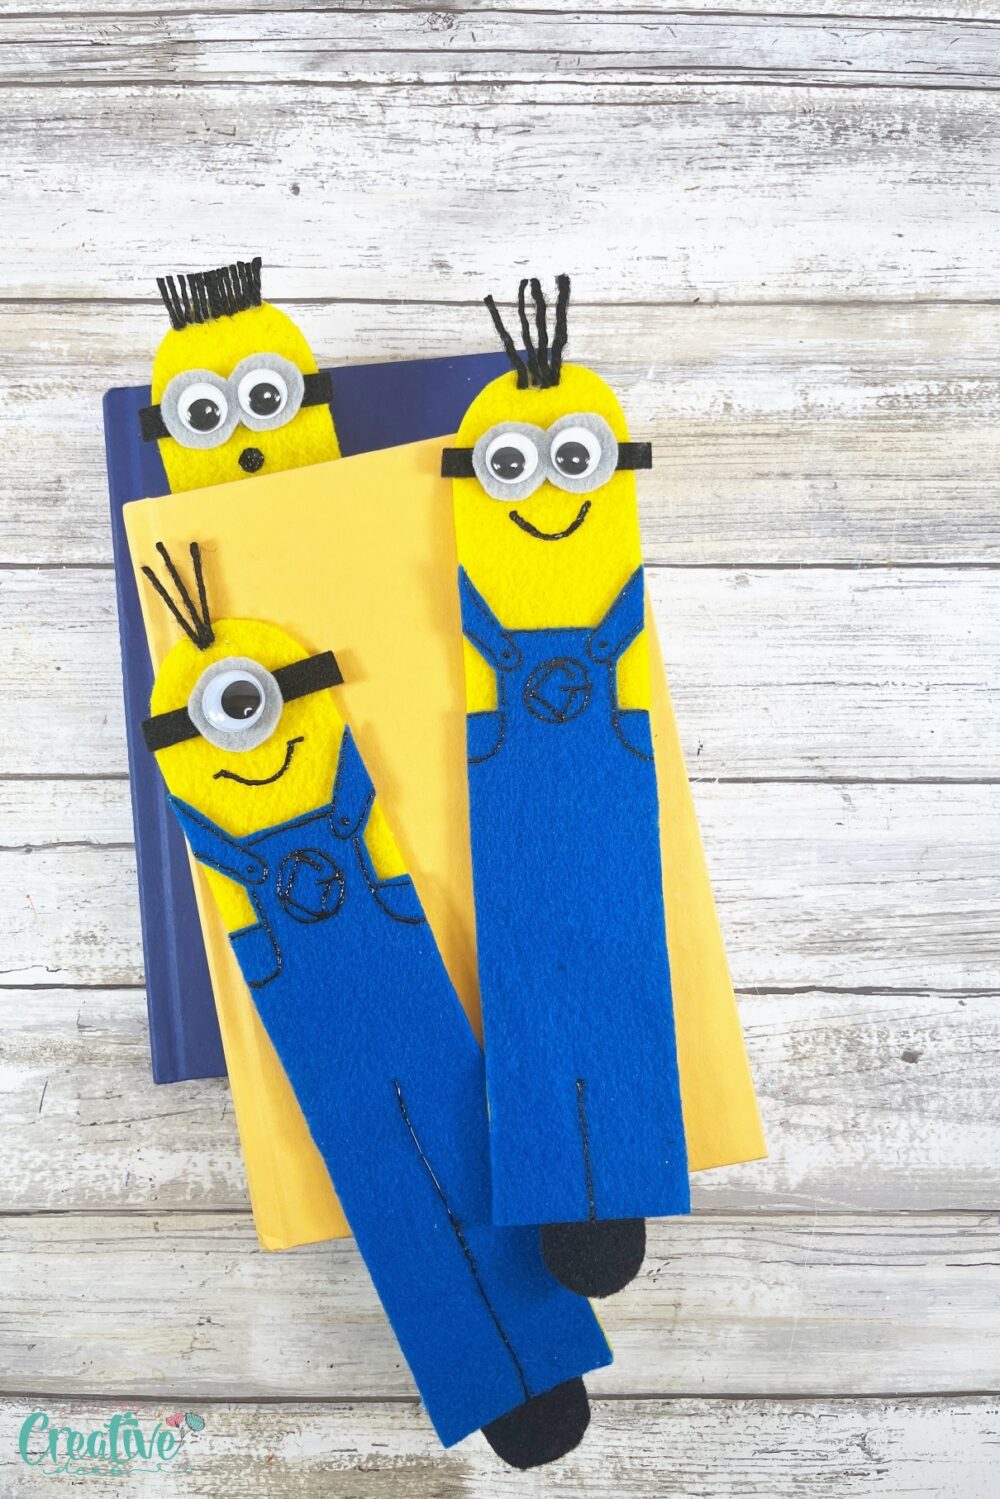 Three adorable DIY minion bookmarks with colorful felt eyes and hair, perfect for marking your place in any book!